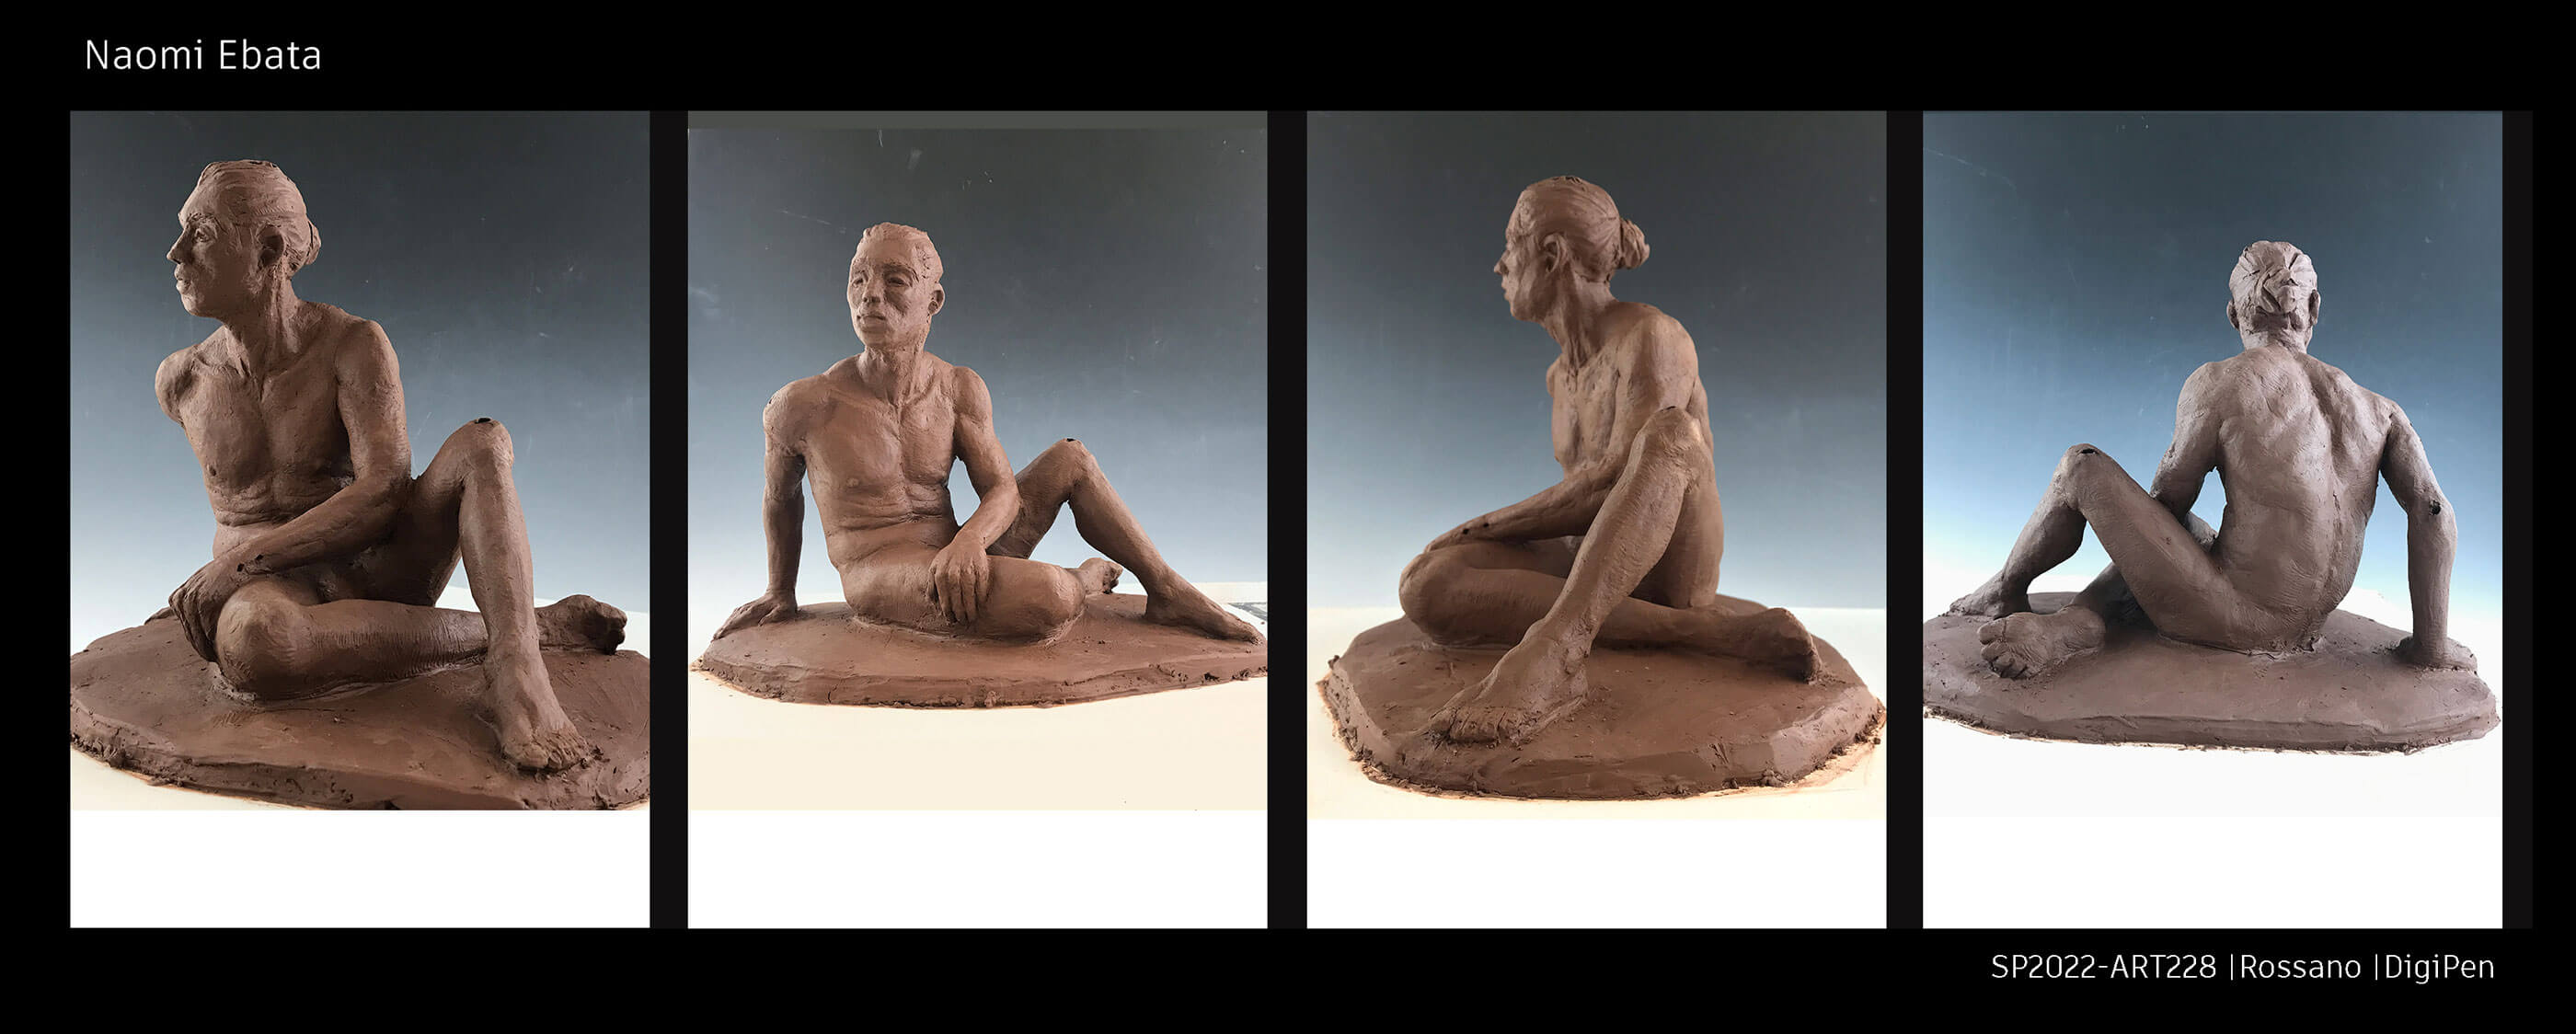 Clay model of a nude man sitting on the floor.